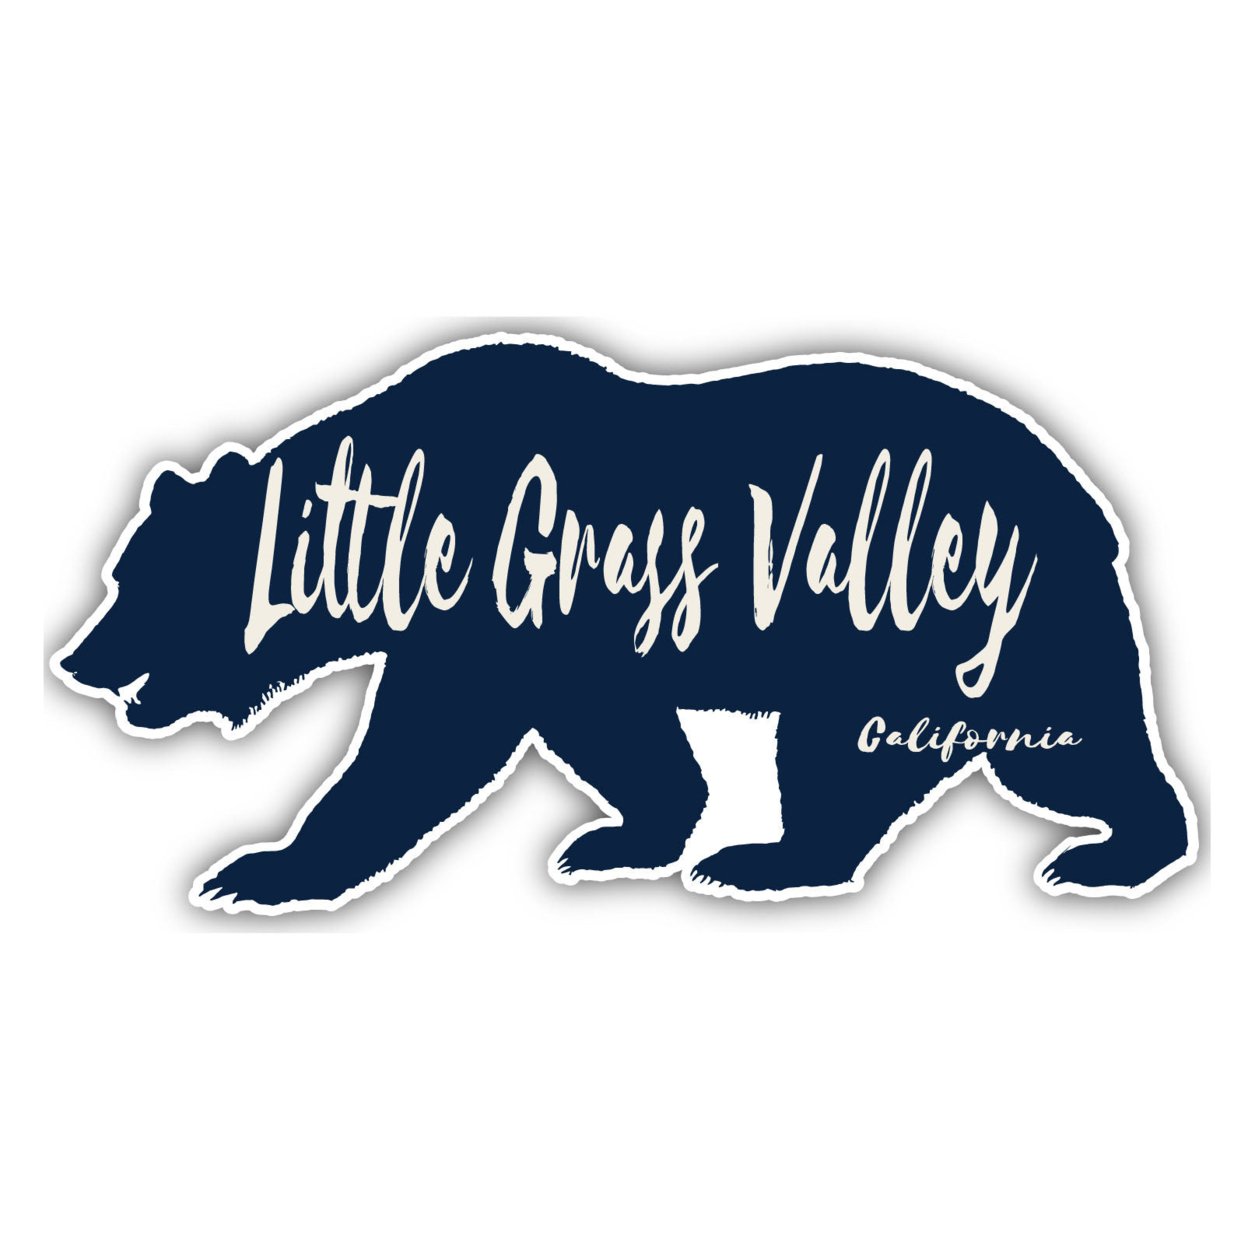 Little Grass Valley California Souvenir Decorative Stickers (Choose Theme And Size) - 2-Inch, Bear